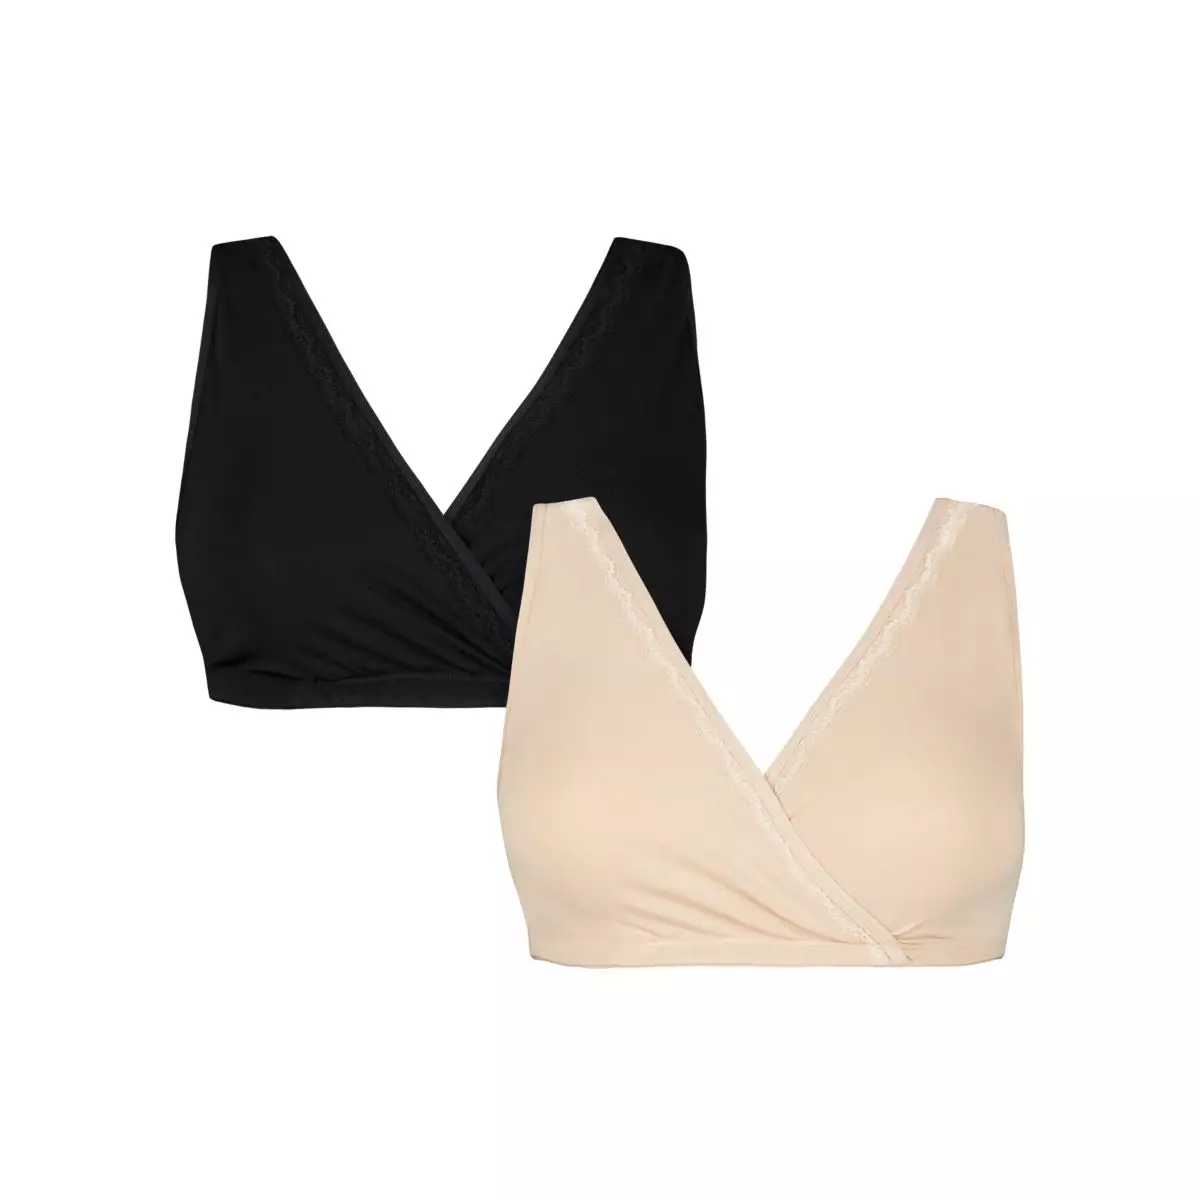 Jual Mothercare Black And Nude Lace Nursing T-Shirt Bras - 2 Pack